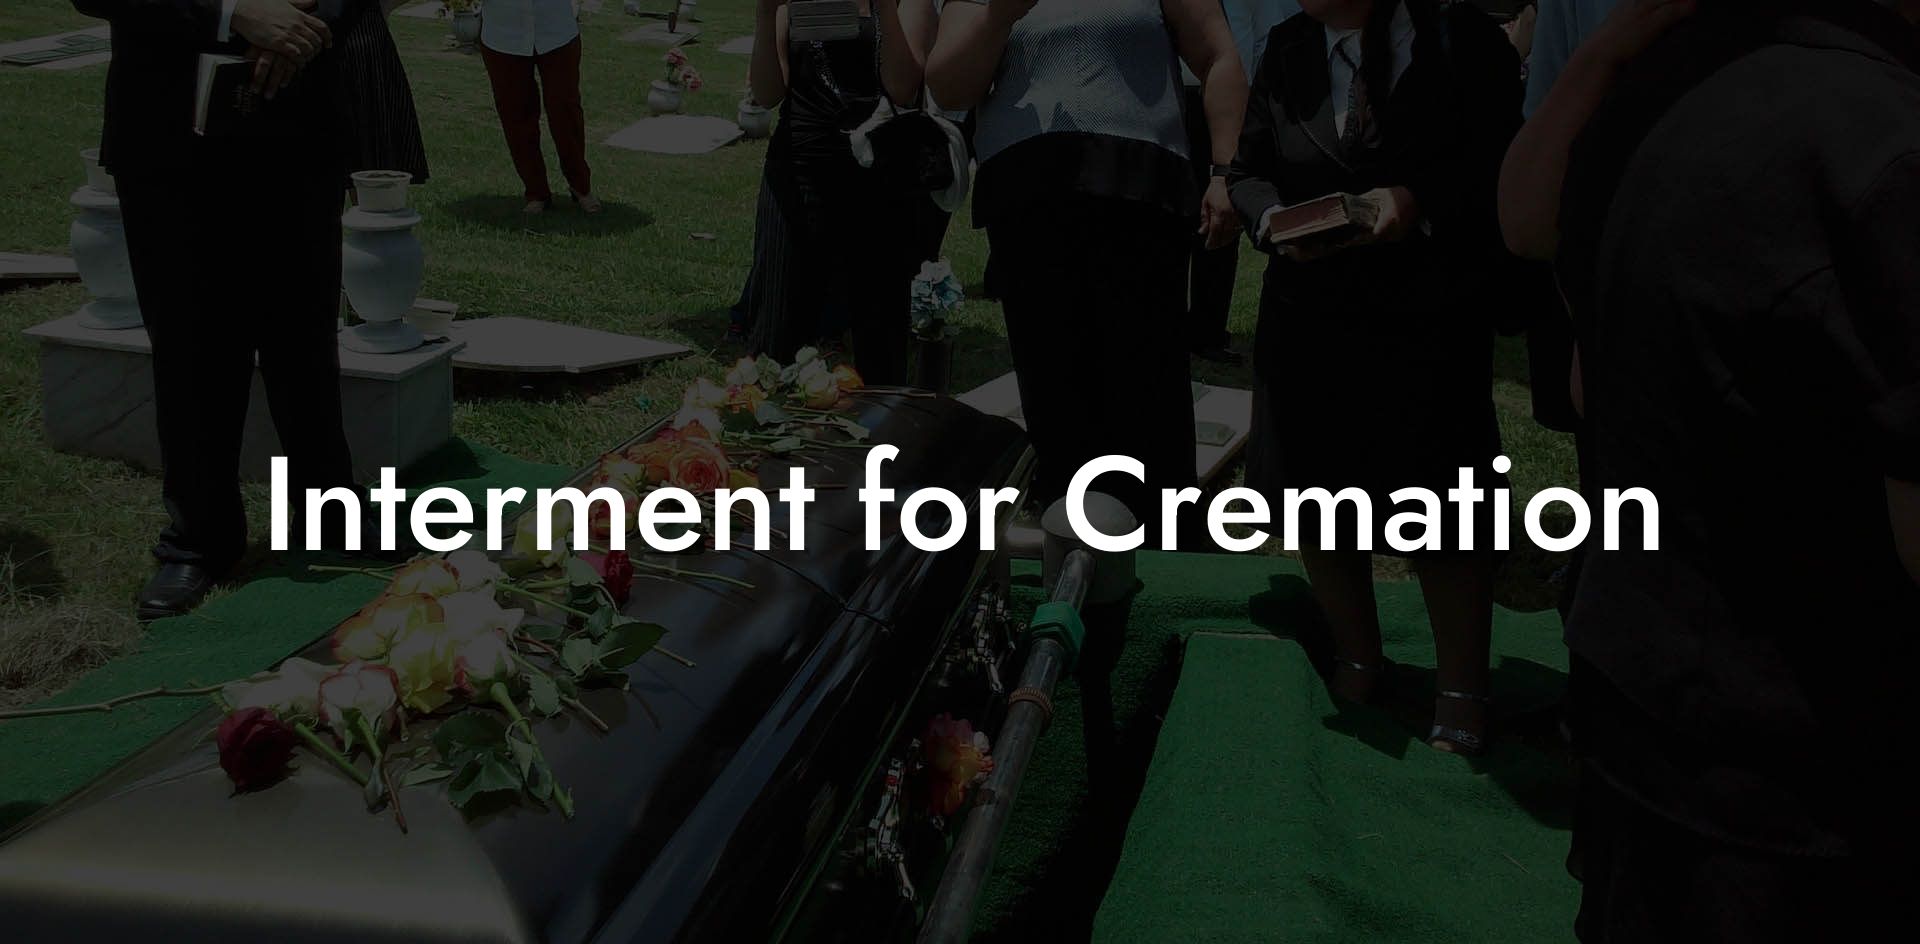 Interment for Cremation